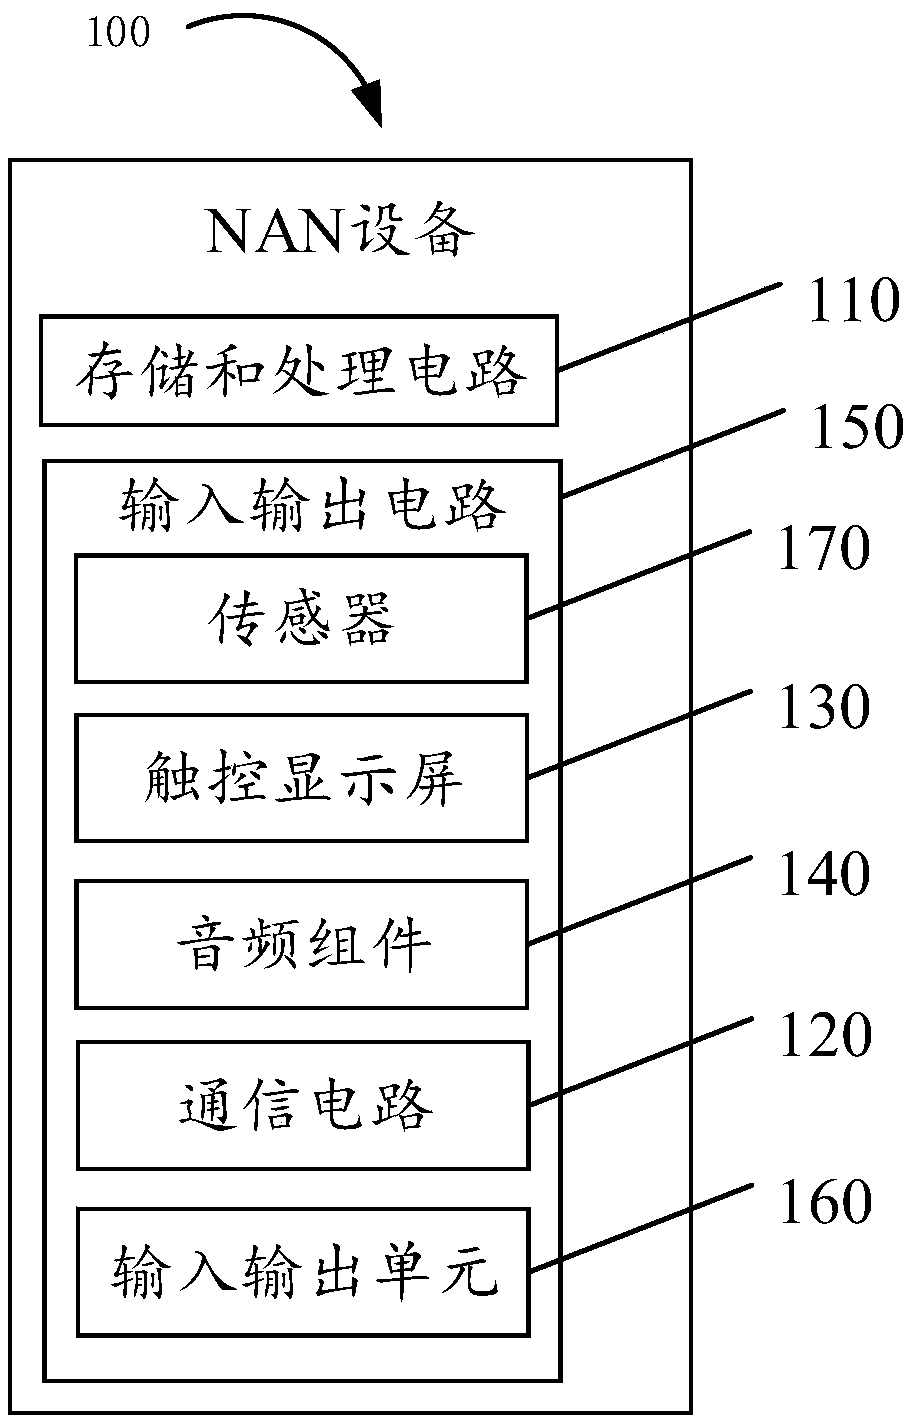 Data transmission method and related products